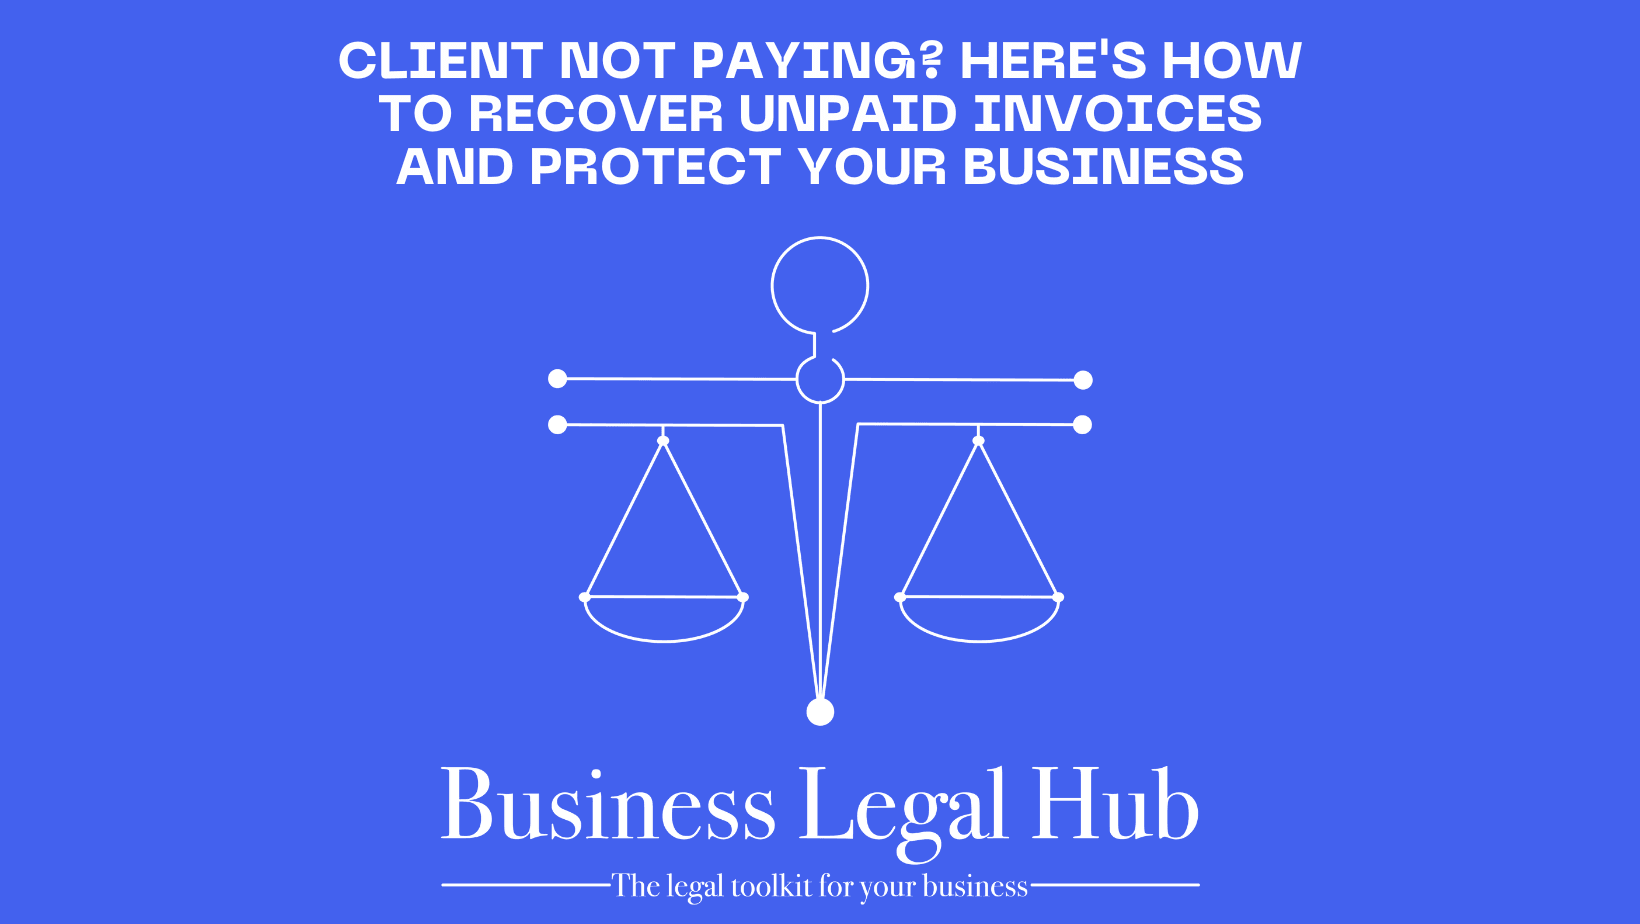 Client Not Paying? Here's How to Recover Unpaid Invoices and Protect Your Business - Business Legal Hub